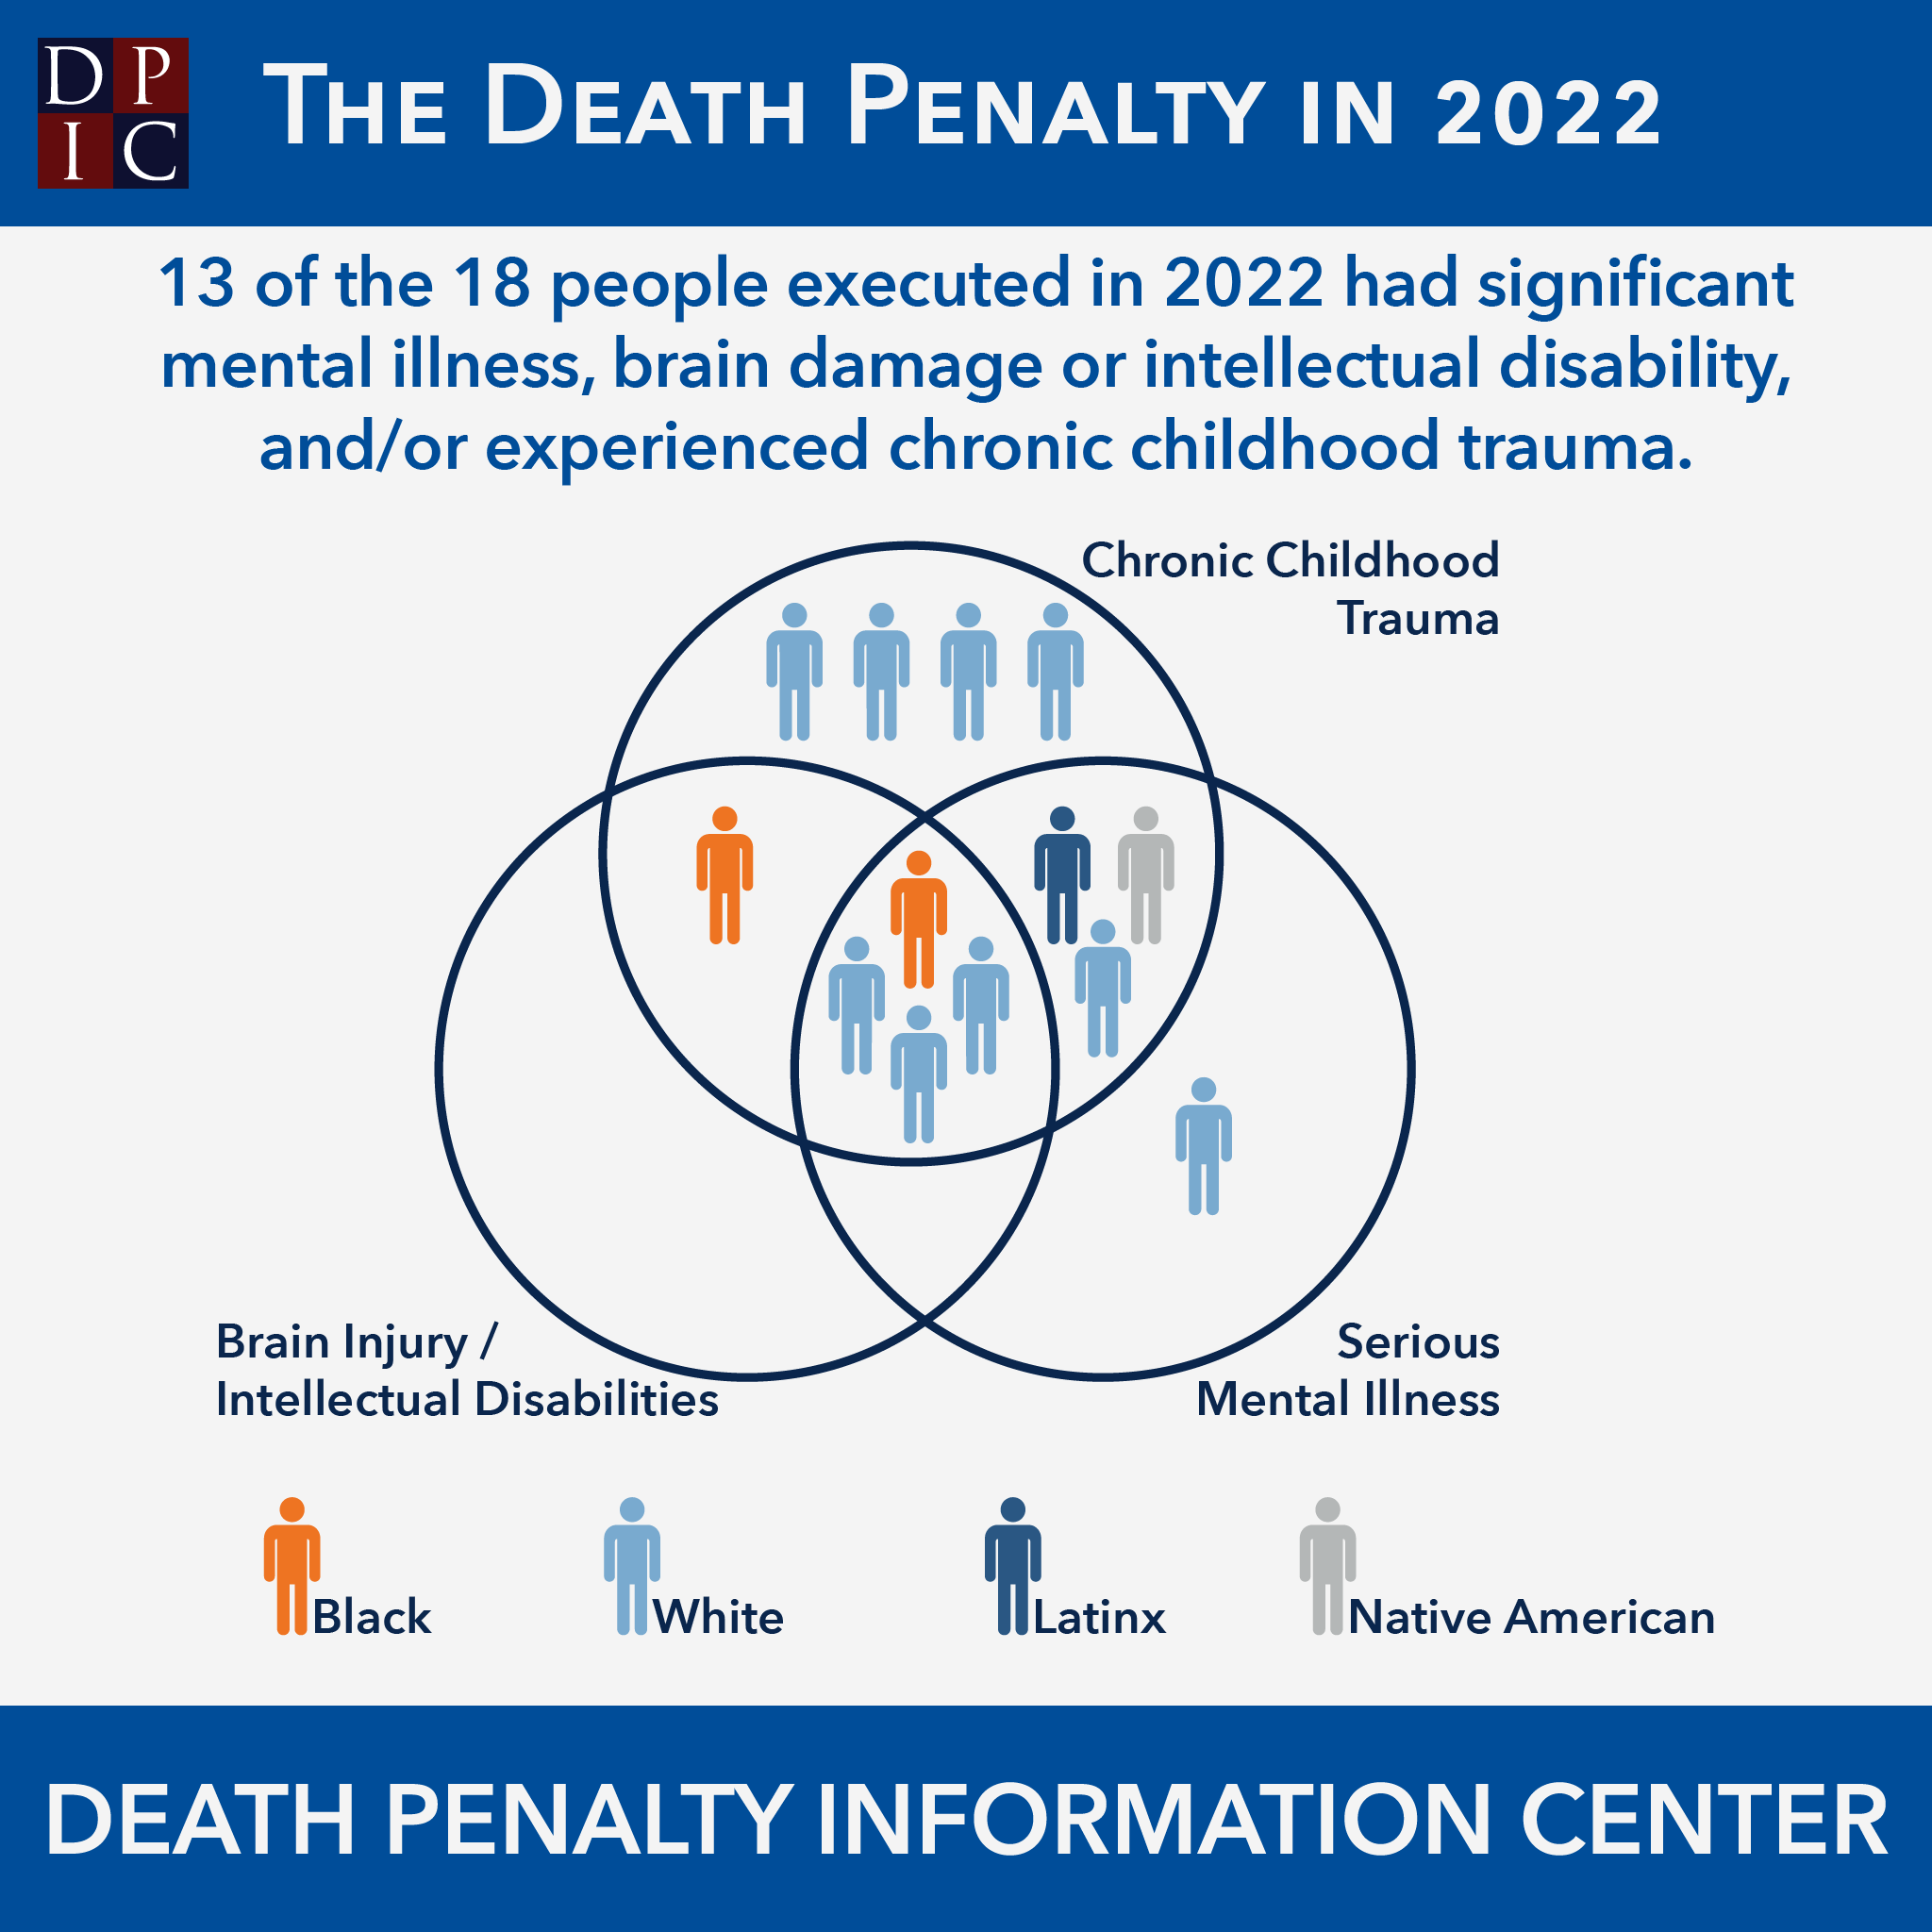 Robert Dunham on X: "The Death Penalty in 2022—More than two-thirds of the  people executed in the U.S. in 2022 had significant mental illness, brain  damage or intellectual disabilities, and/or had experienced